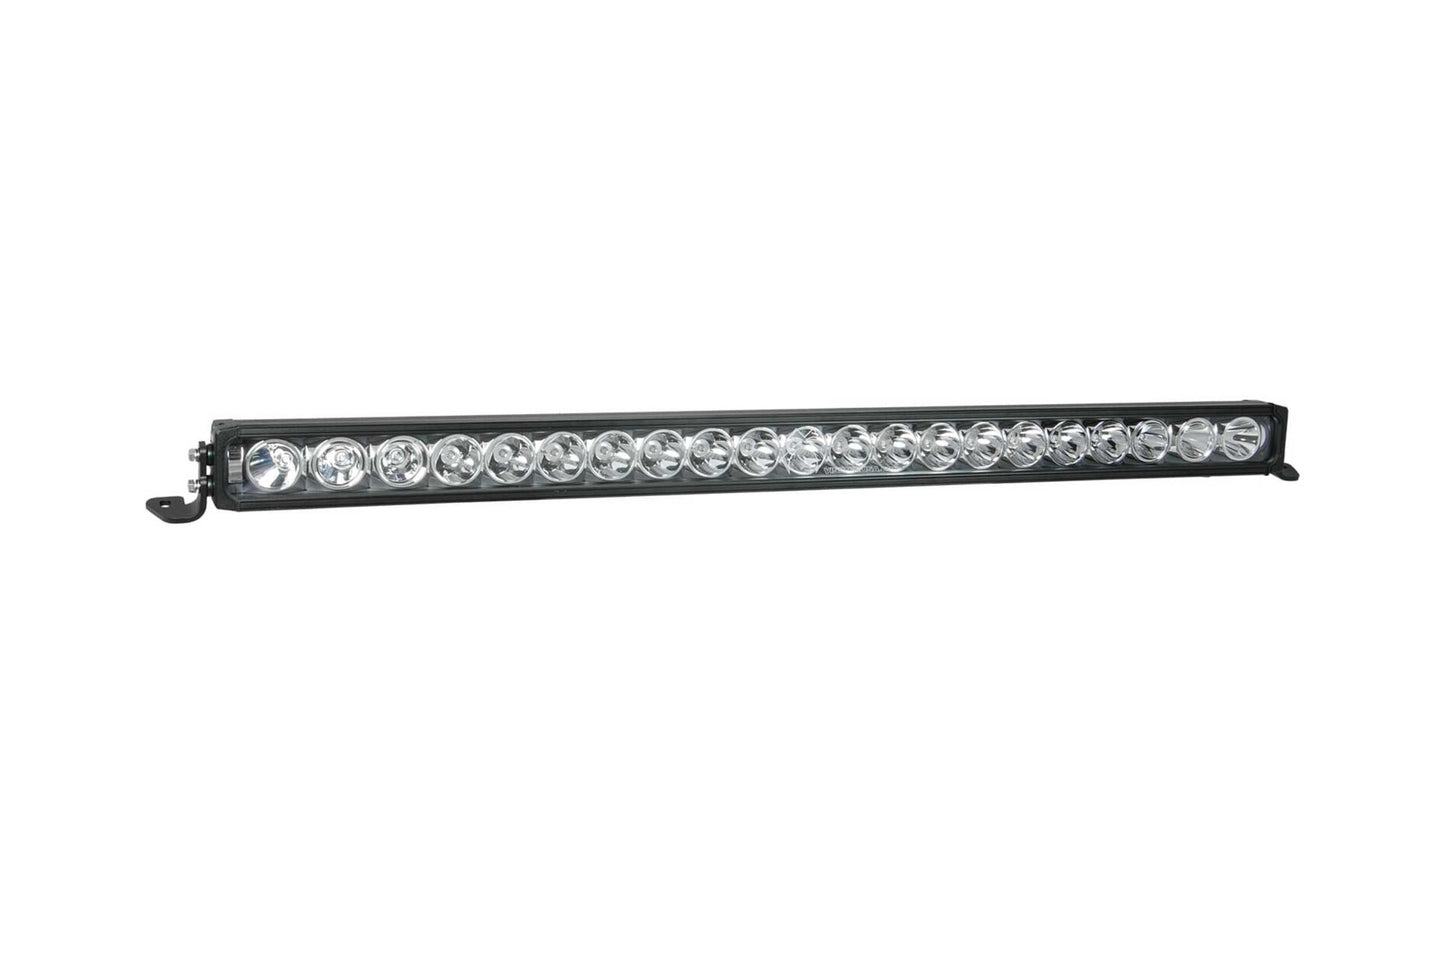 Vision X Light Bar: 19in (9-LED / XPR-S / Xtreme Distance Spot Beam)